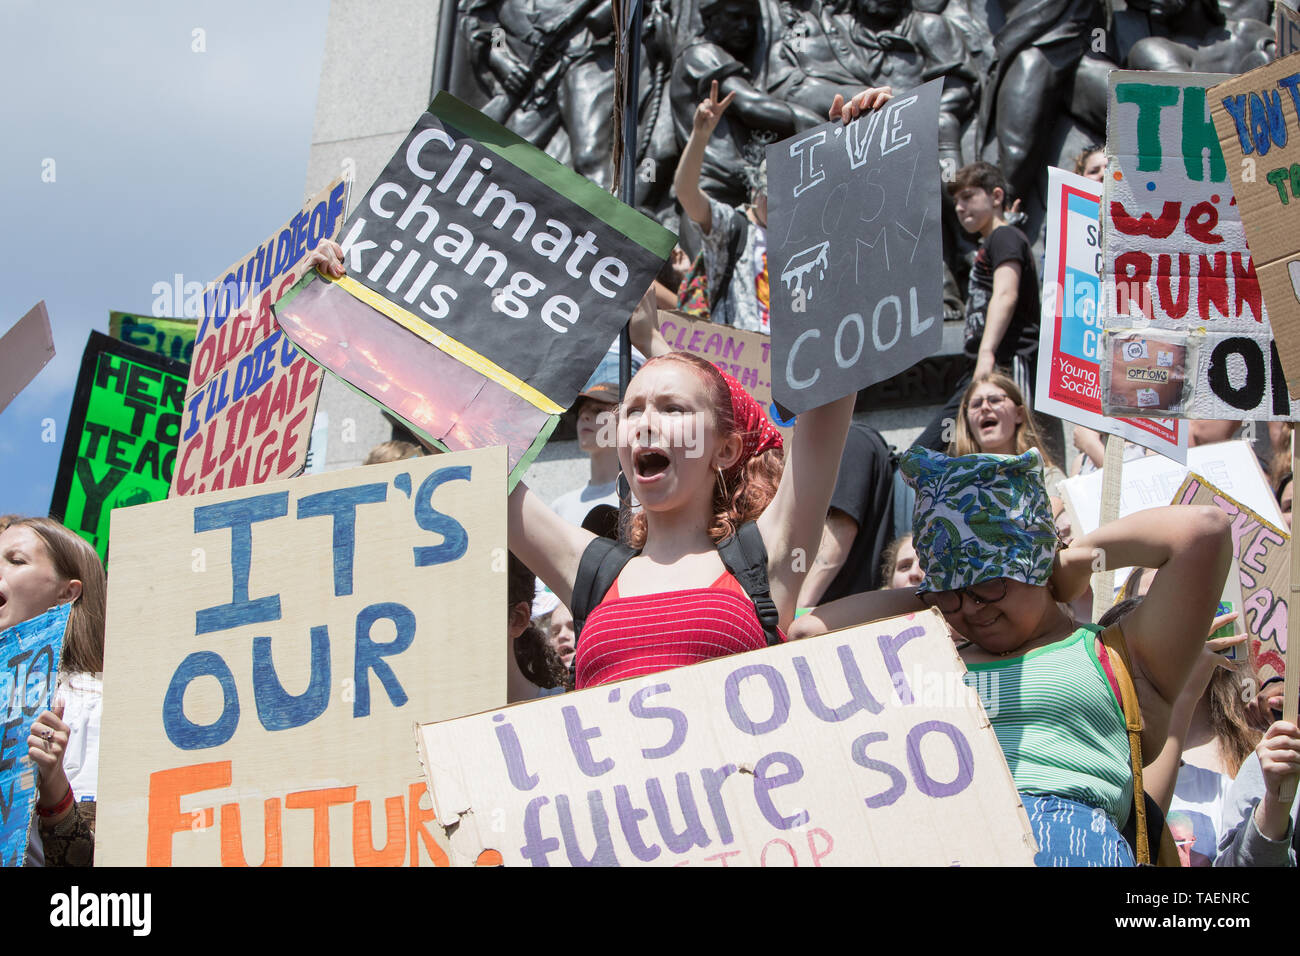 London, UK. 24 May 2019. Thousand of demonstrators gather in Parliament Square, Westminster. The students demand that climate and ecological crisis becomes part of the government agenda. They stage a sit down protest outside the Department of Education before marching on to Trafalgar Square. Stock Photo